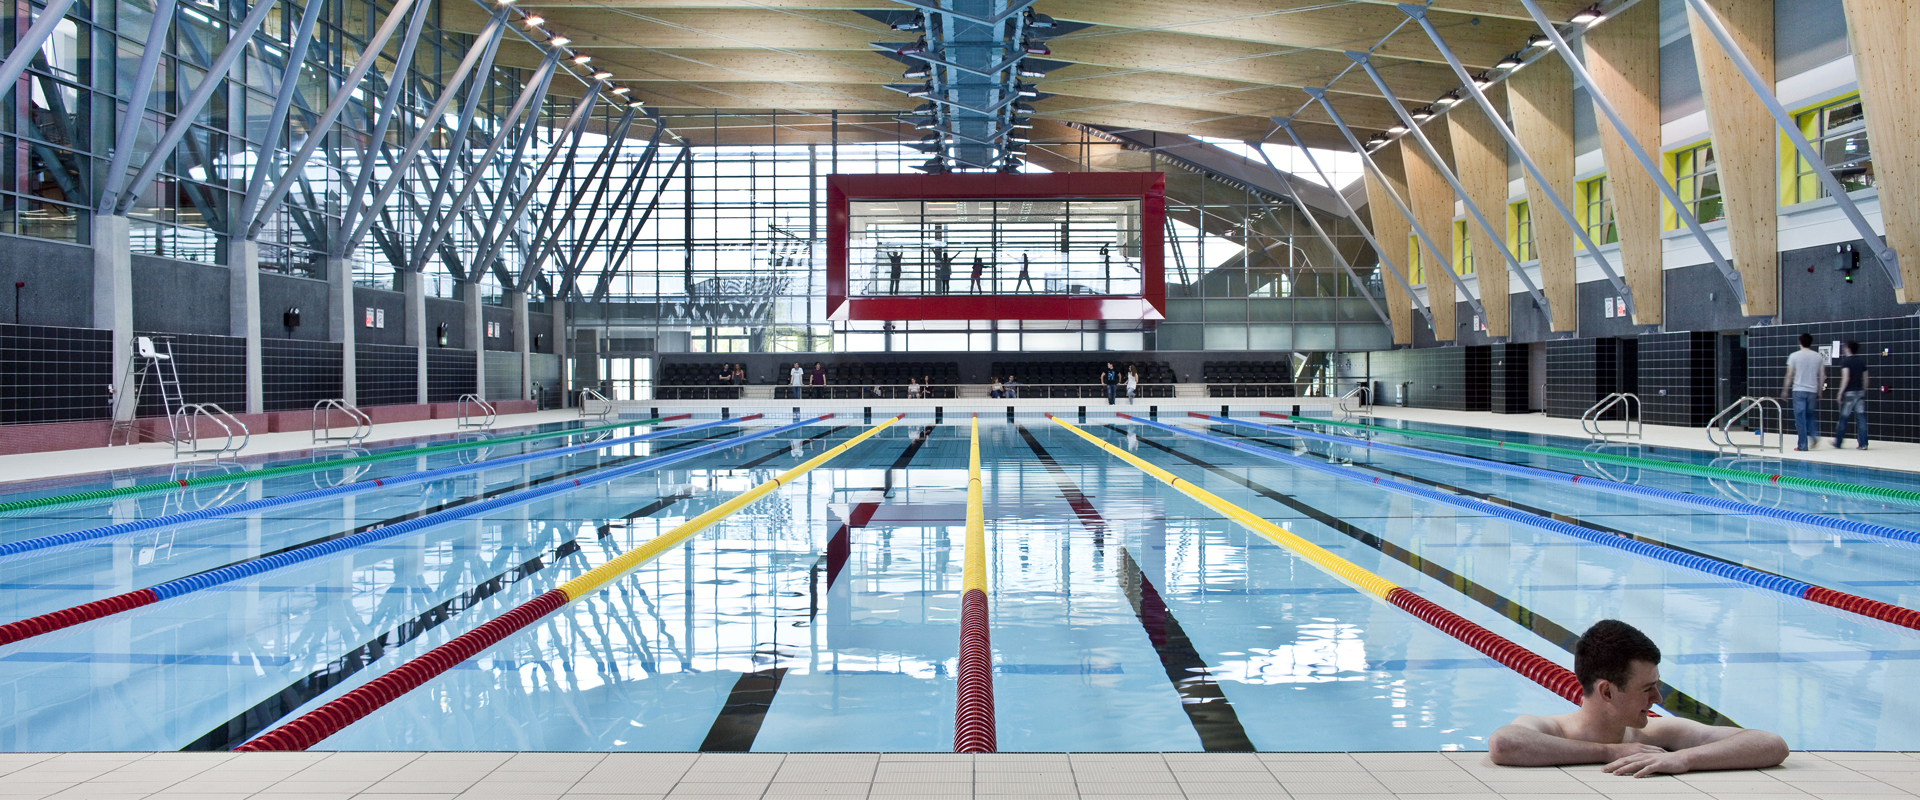 Image of the UCD swimming pool